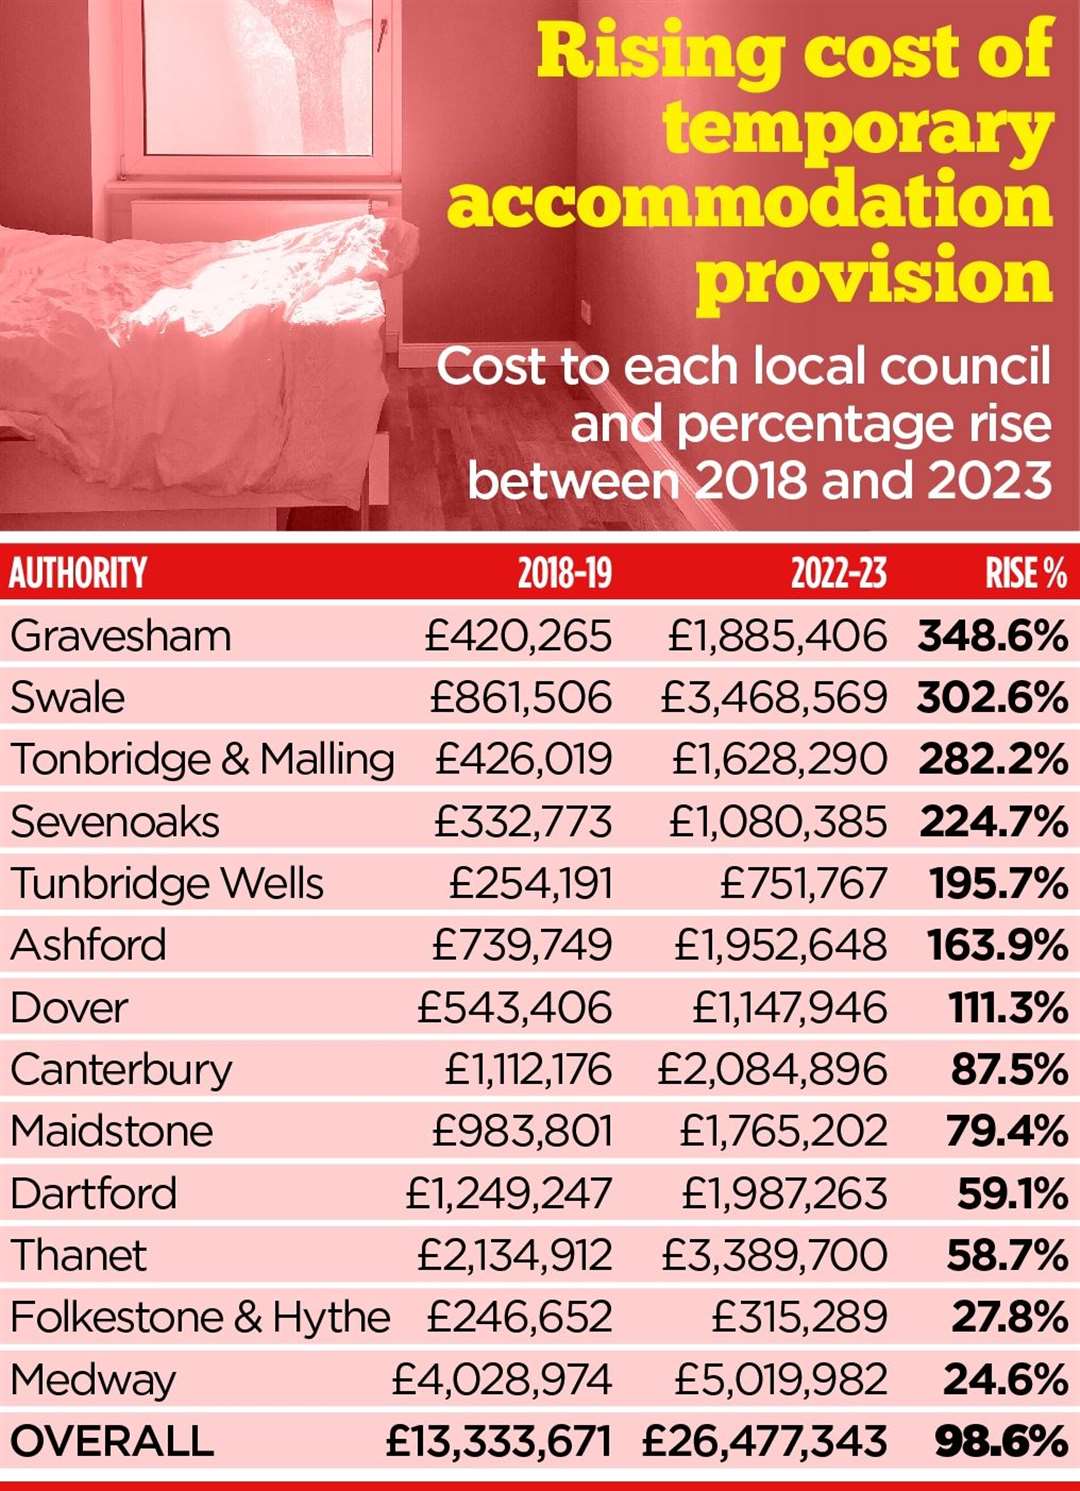 A graphic showing each Kent council's spending on temporary accommodation in 2018-19 and 2022-23